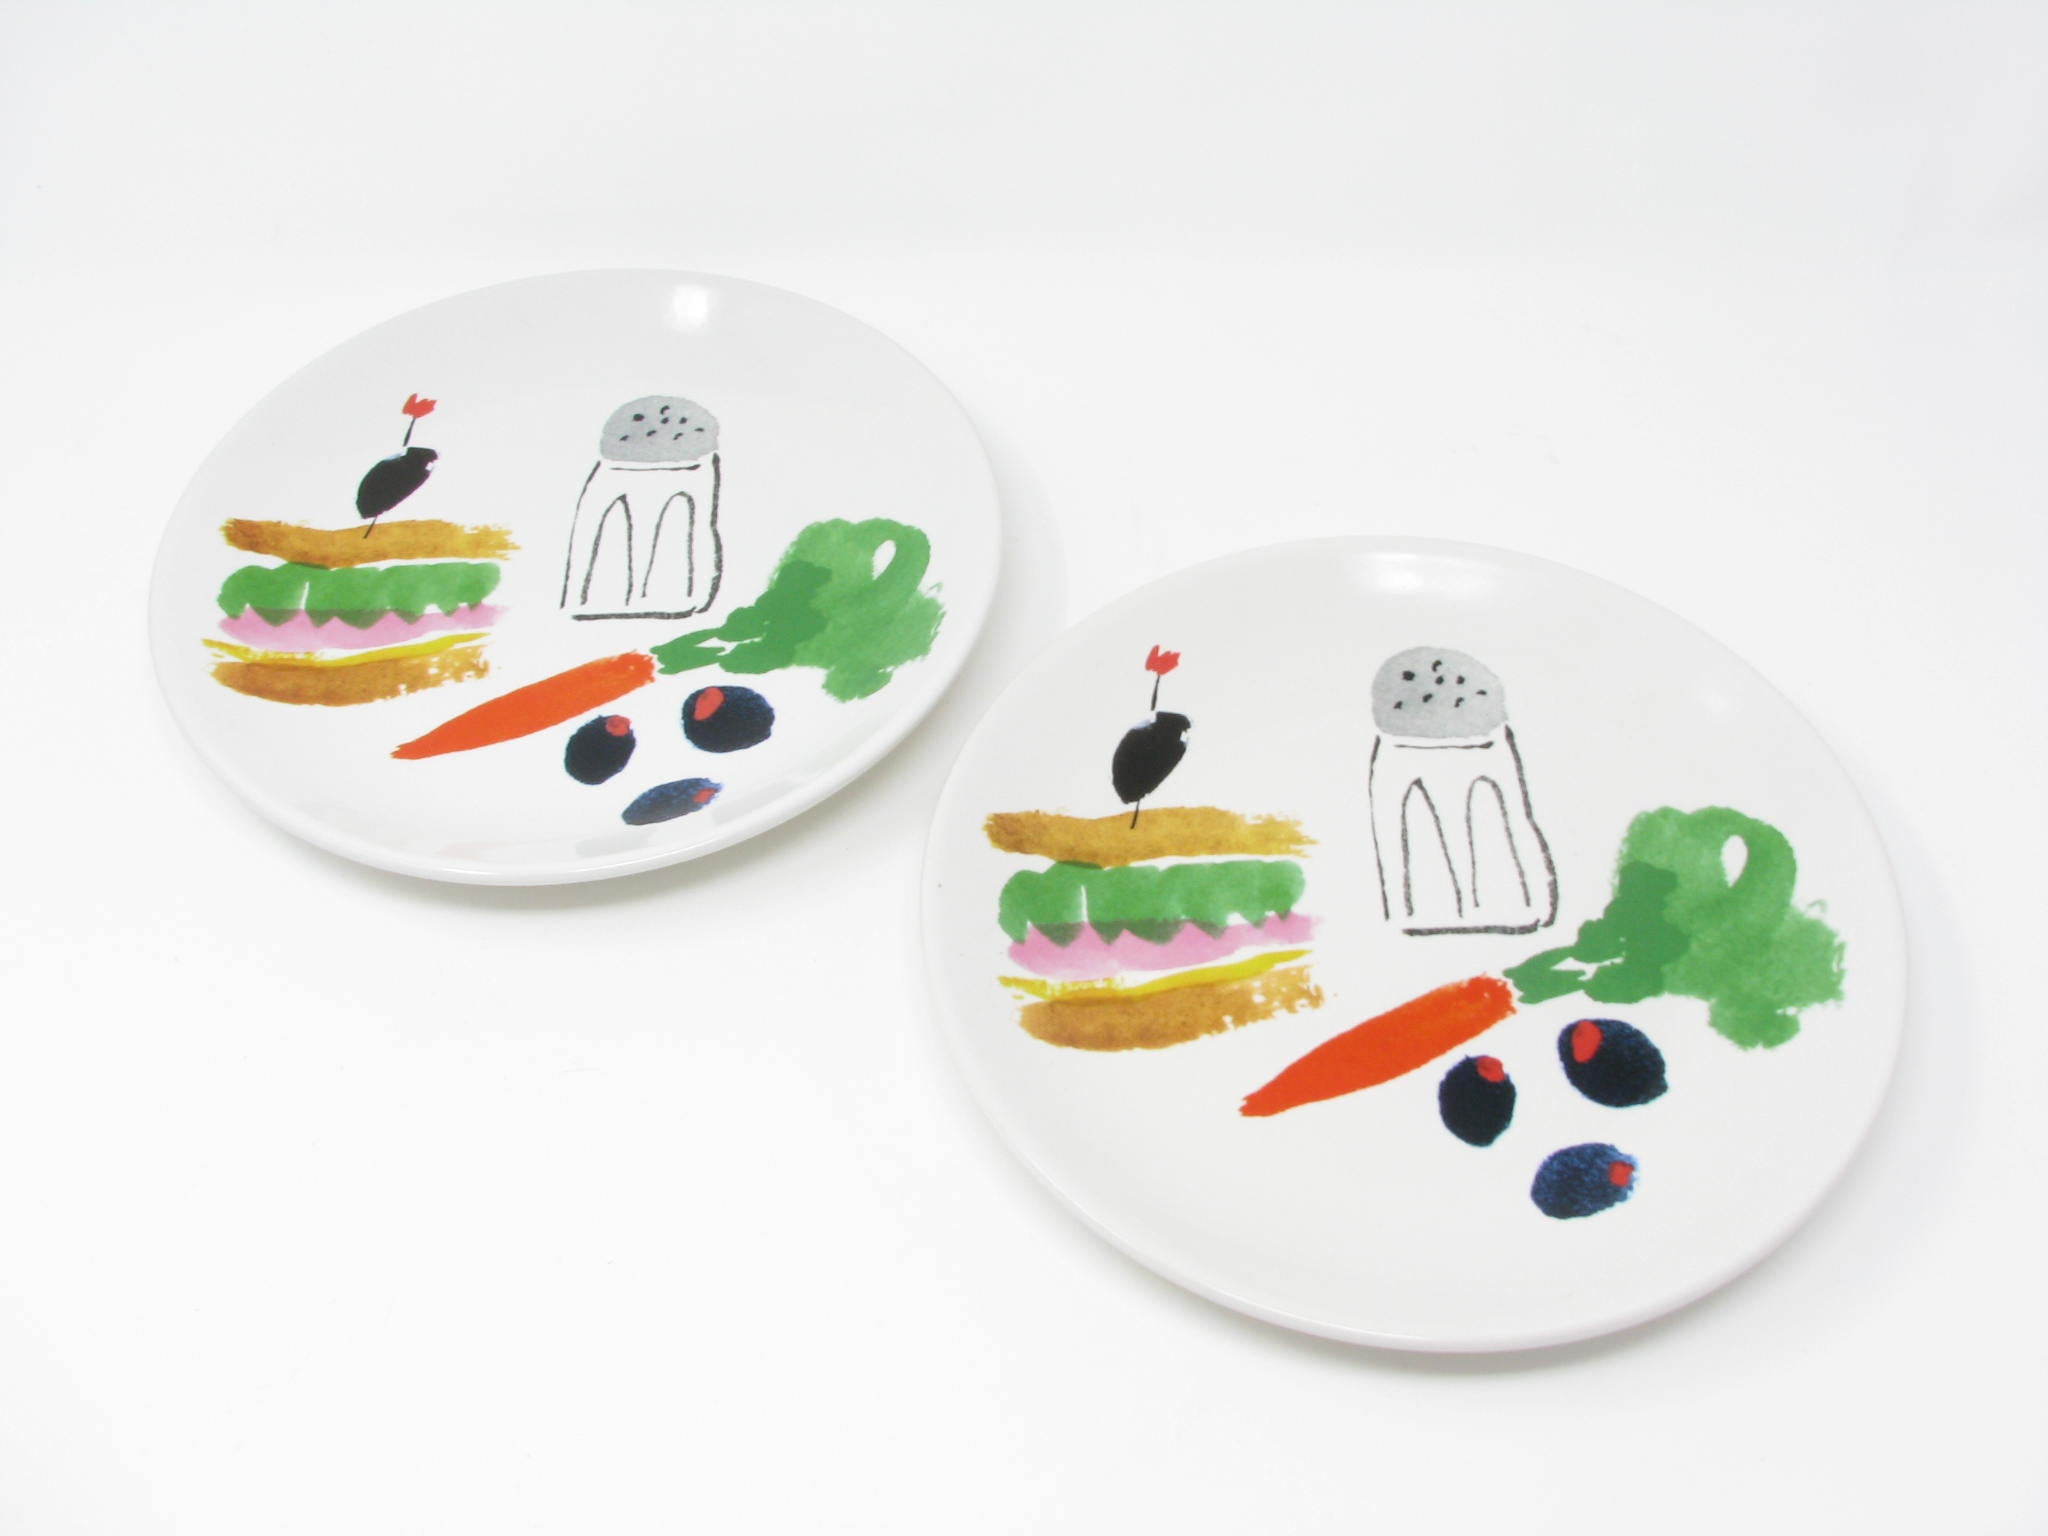 edgebrookhouse - Kate Spade Lenox All in  Good Taste Salad Luncheon Plates with BBQ Design - Set of 2